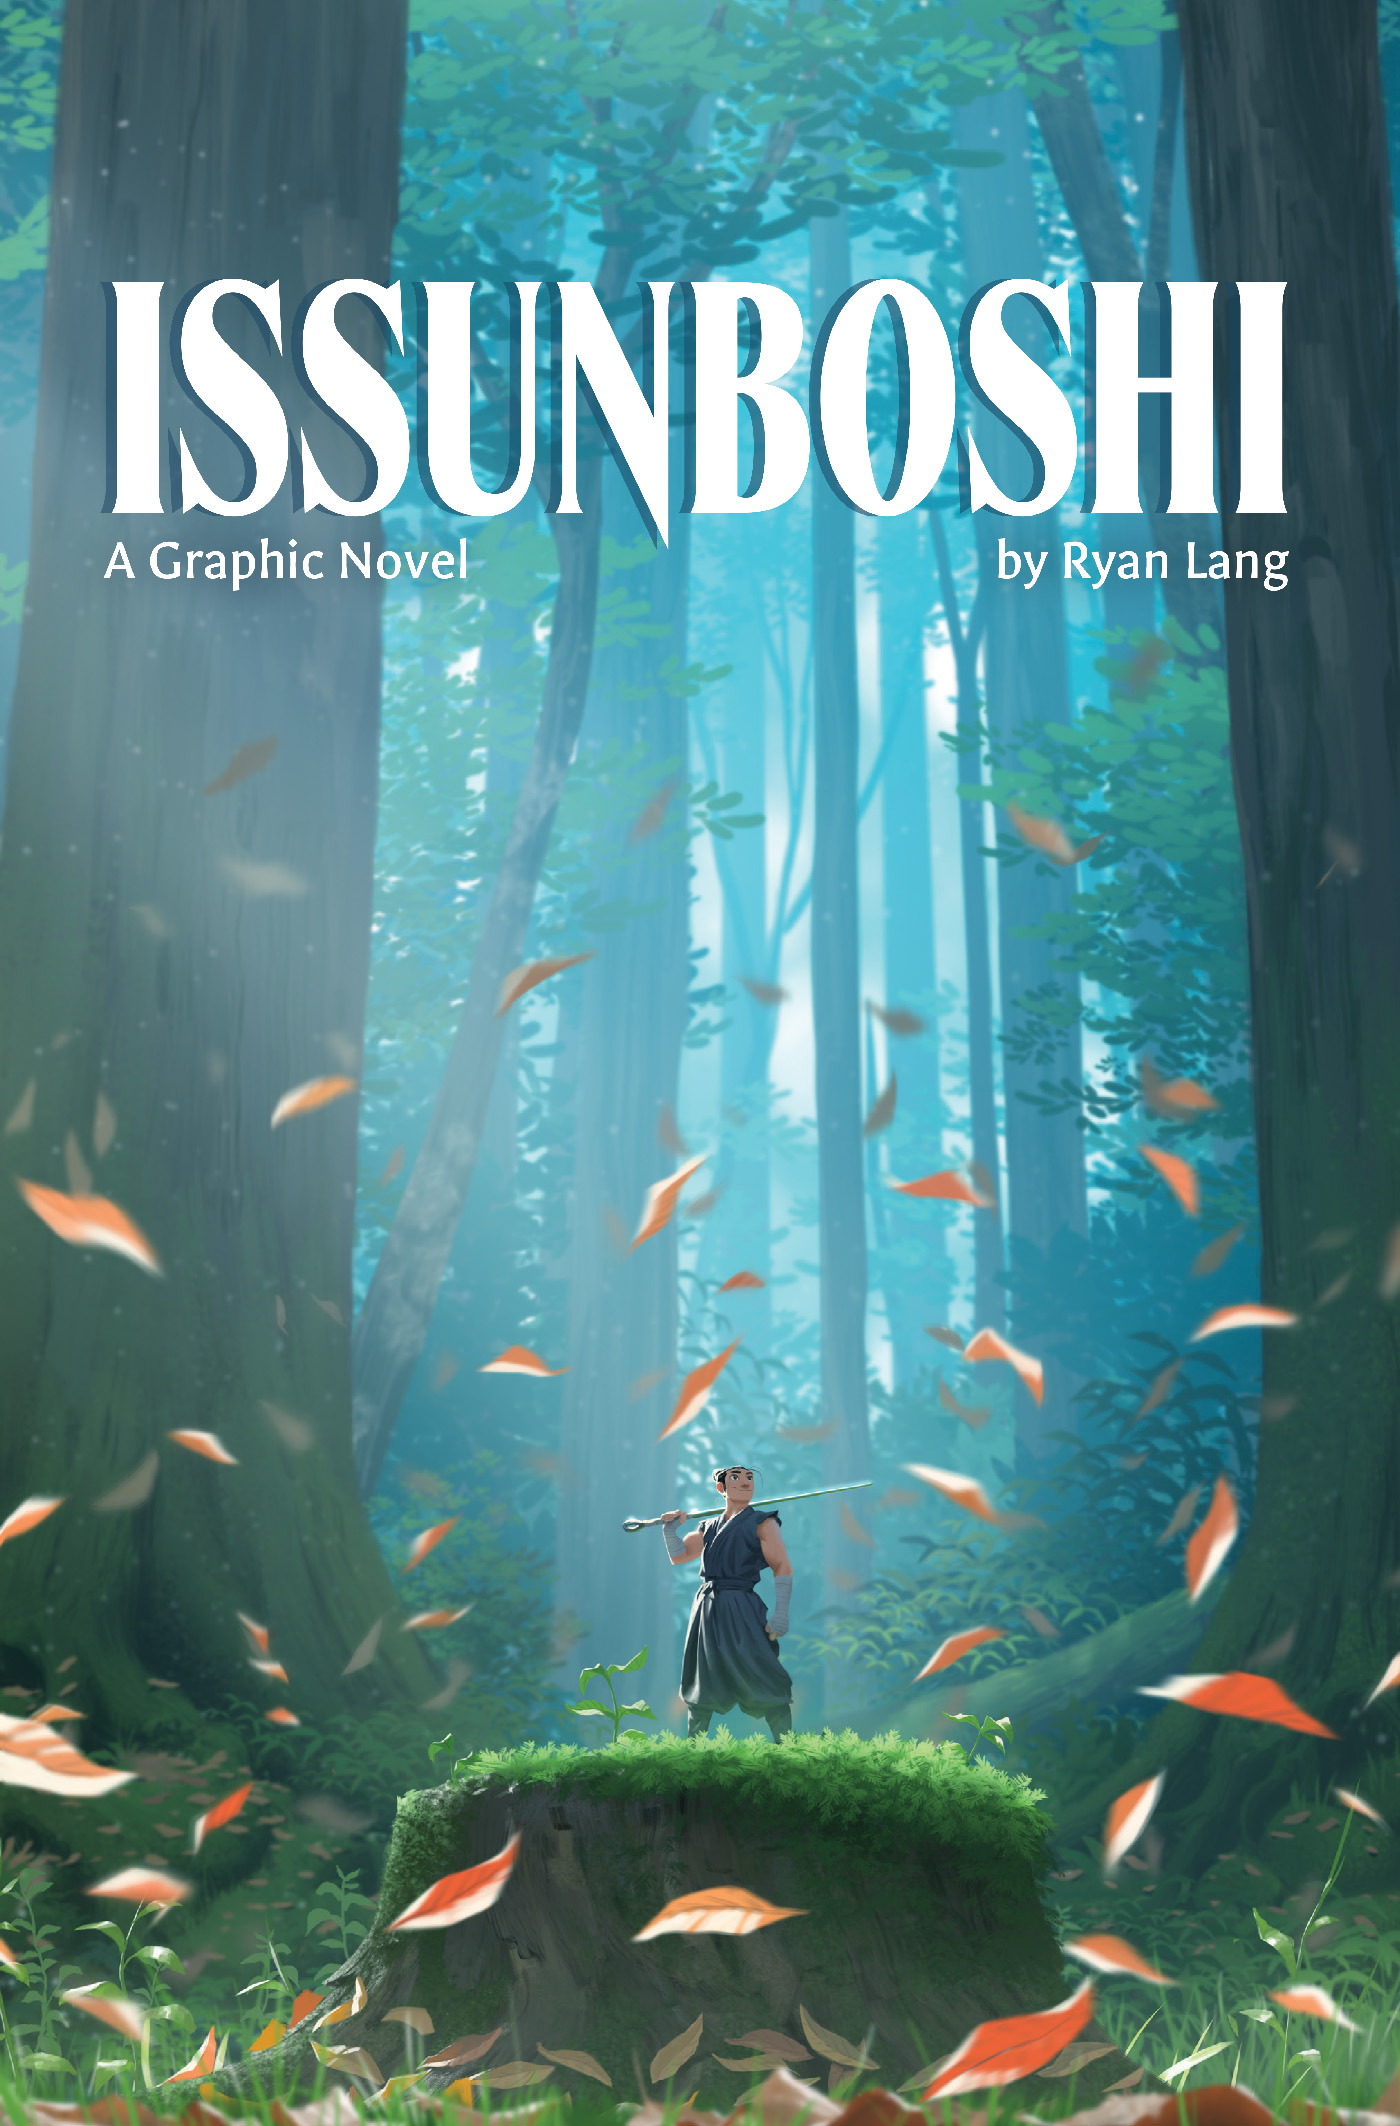 Issunboshi A Graphic Novel Soft Cover